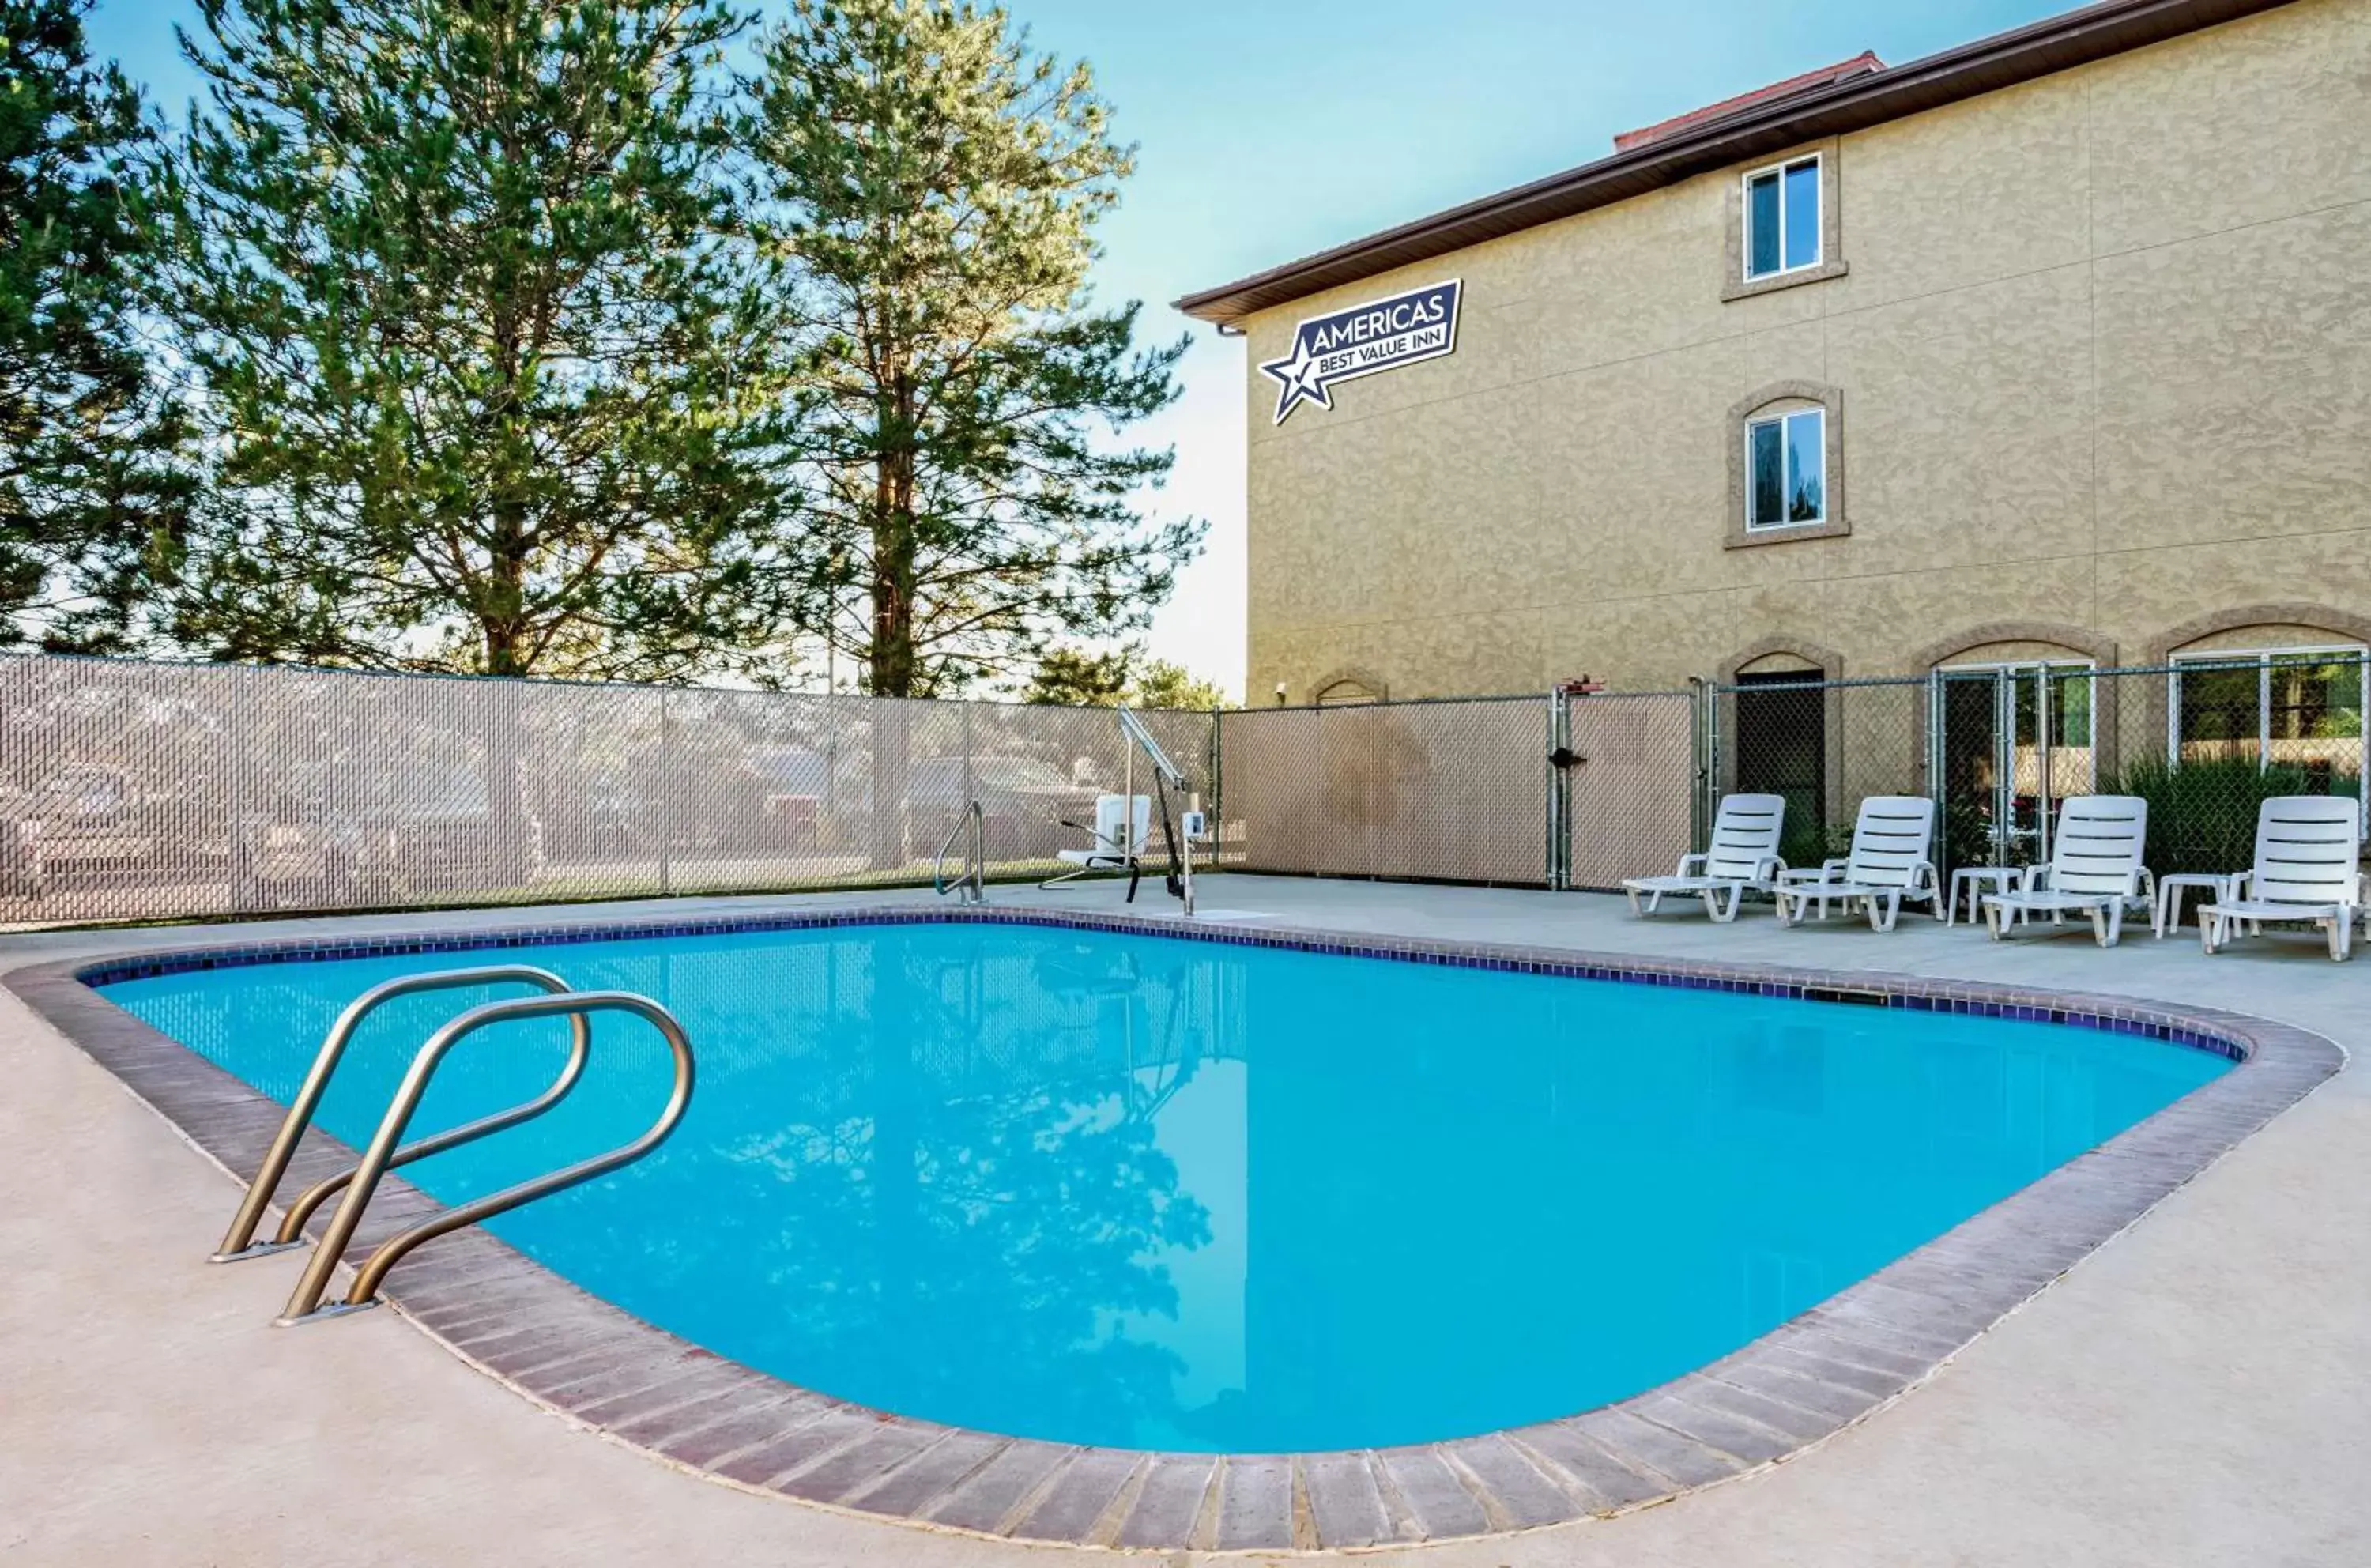 Swimming pool, Property Building in Americas Best Value Inn Sparks